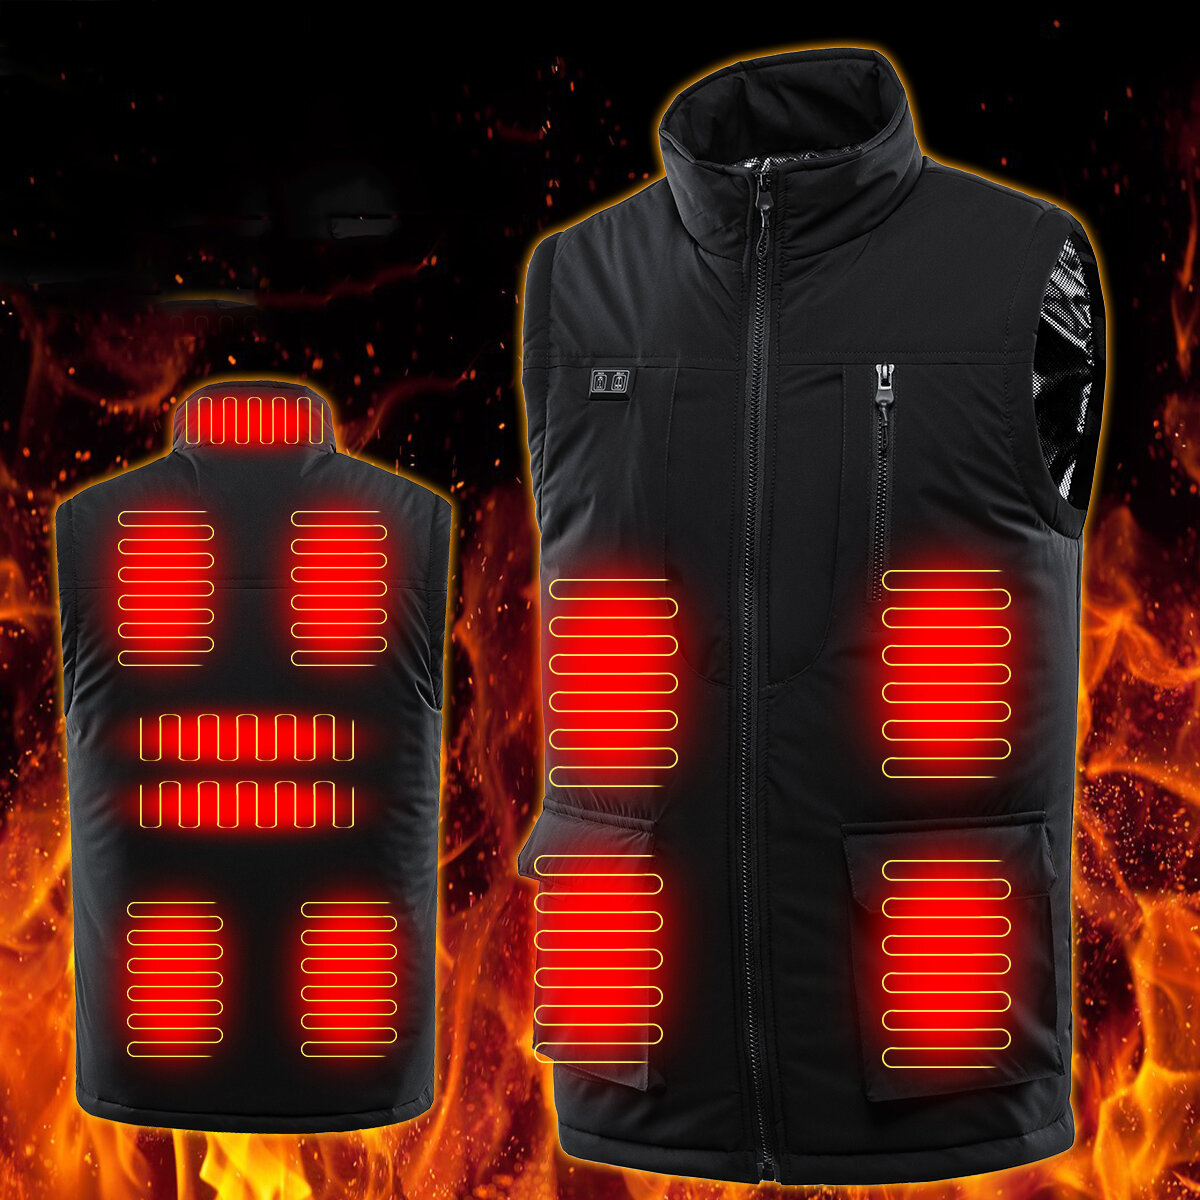 

11 Zone Intelligent Heating Smart Electric Heated Vest Warm Comfortable Winter Heated Jacket for Adult